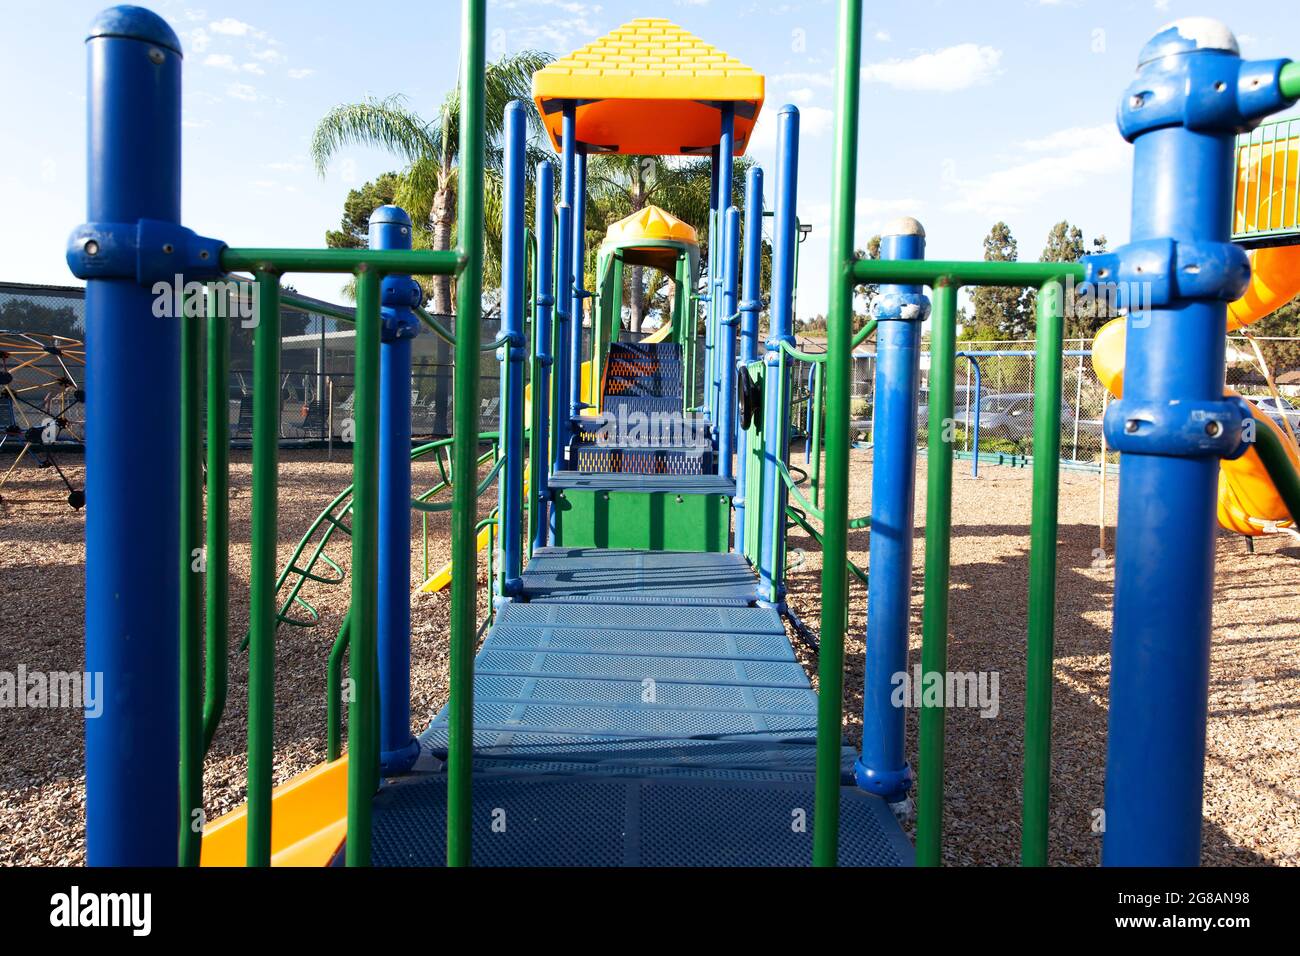 Modern colorful kids playground - swings, slides, steps and ladders. Outdoor plastic playing area for children. Stock Photo